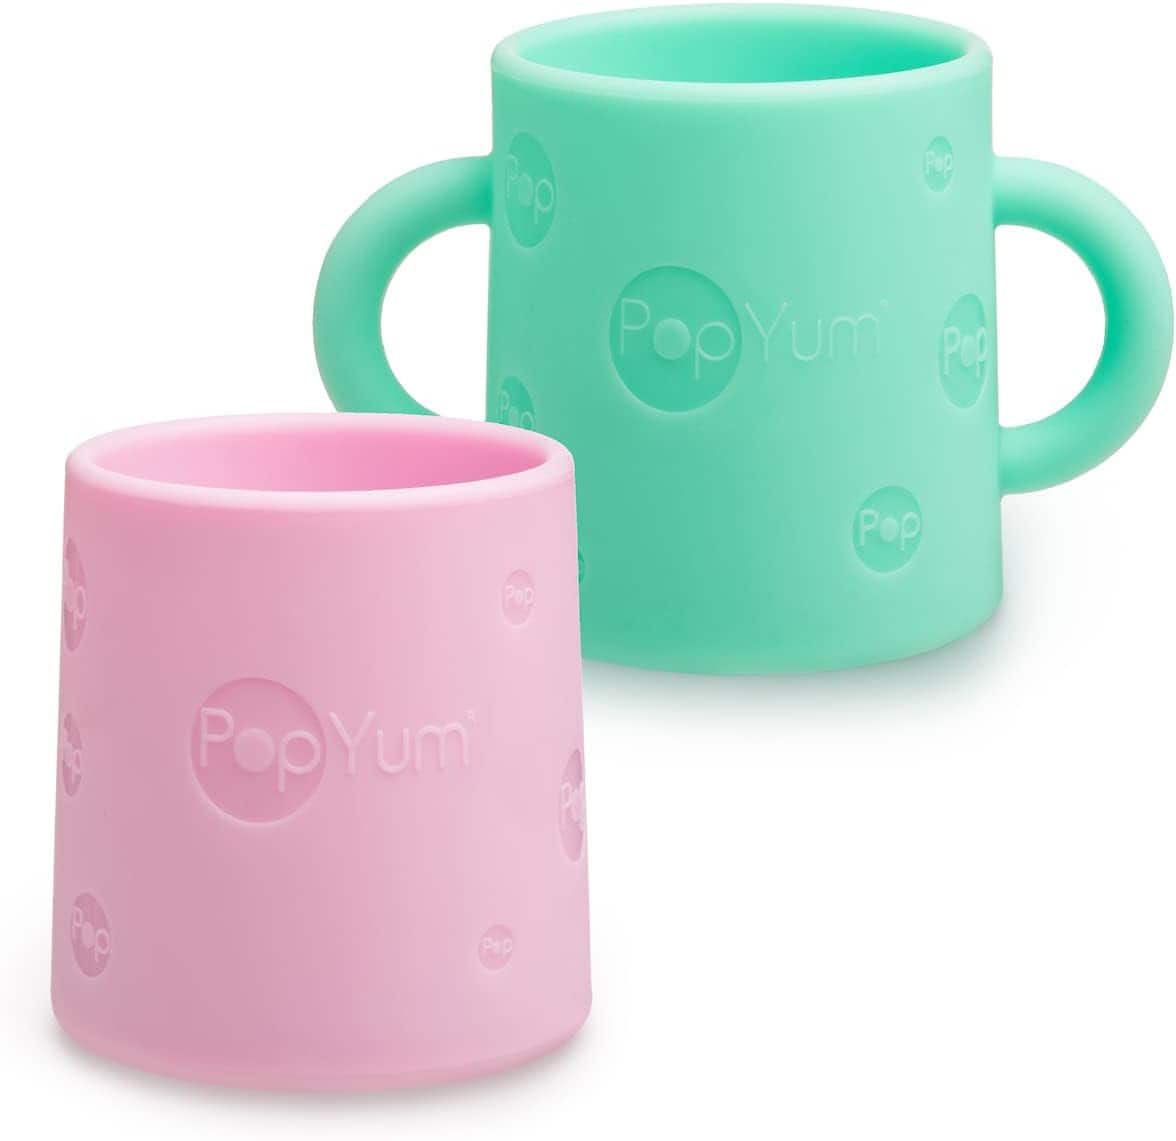 PopYum Silicone Training Cup 2-Pack for Baby and Toddler, handles, BPA Free, self feeding training, tumbler (mint green and pastel pink)